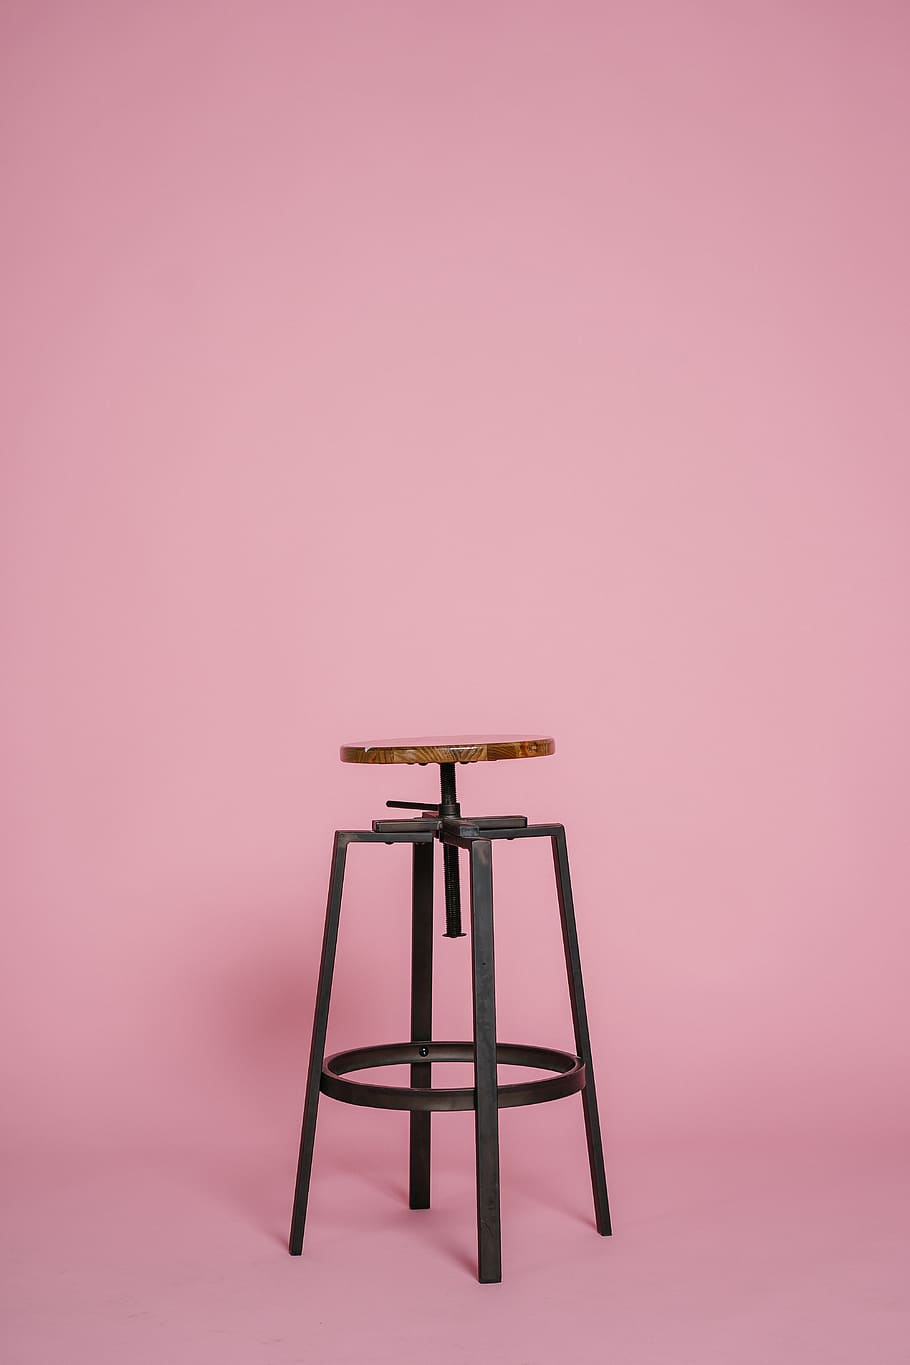 Metal Stool, chair, seat, pink color, indoors, studio shot, colored background